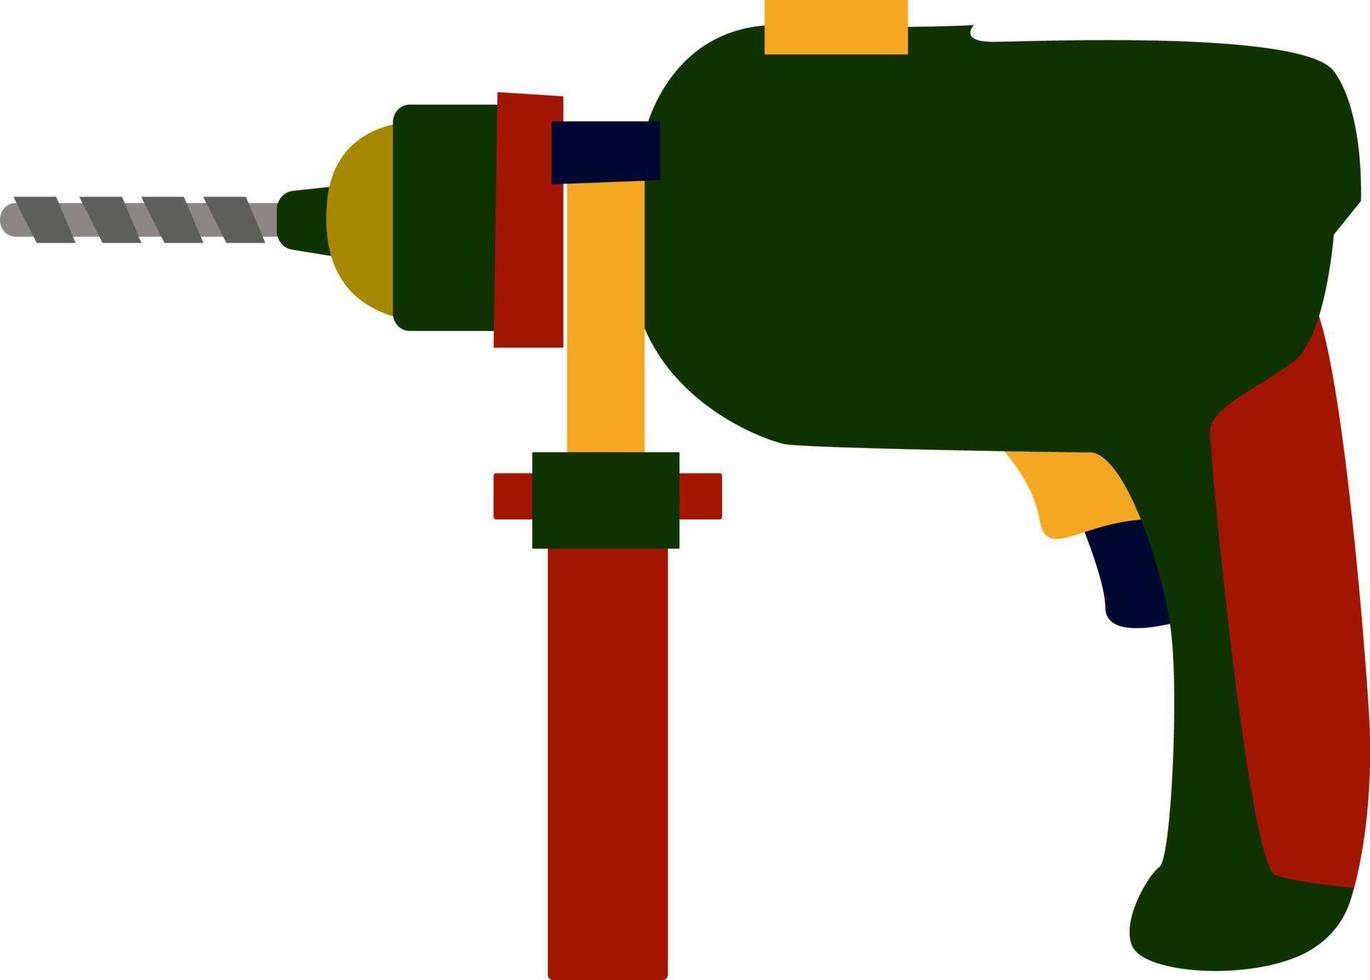 Electric drill, illustration, vector on white background.